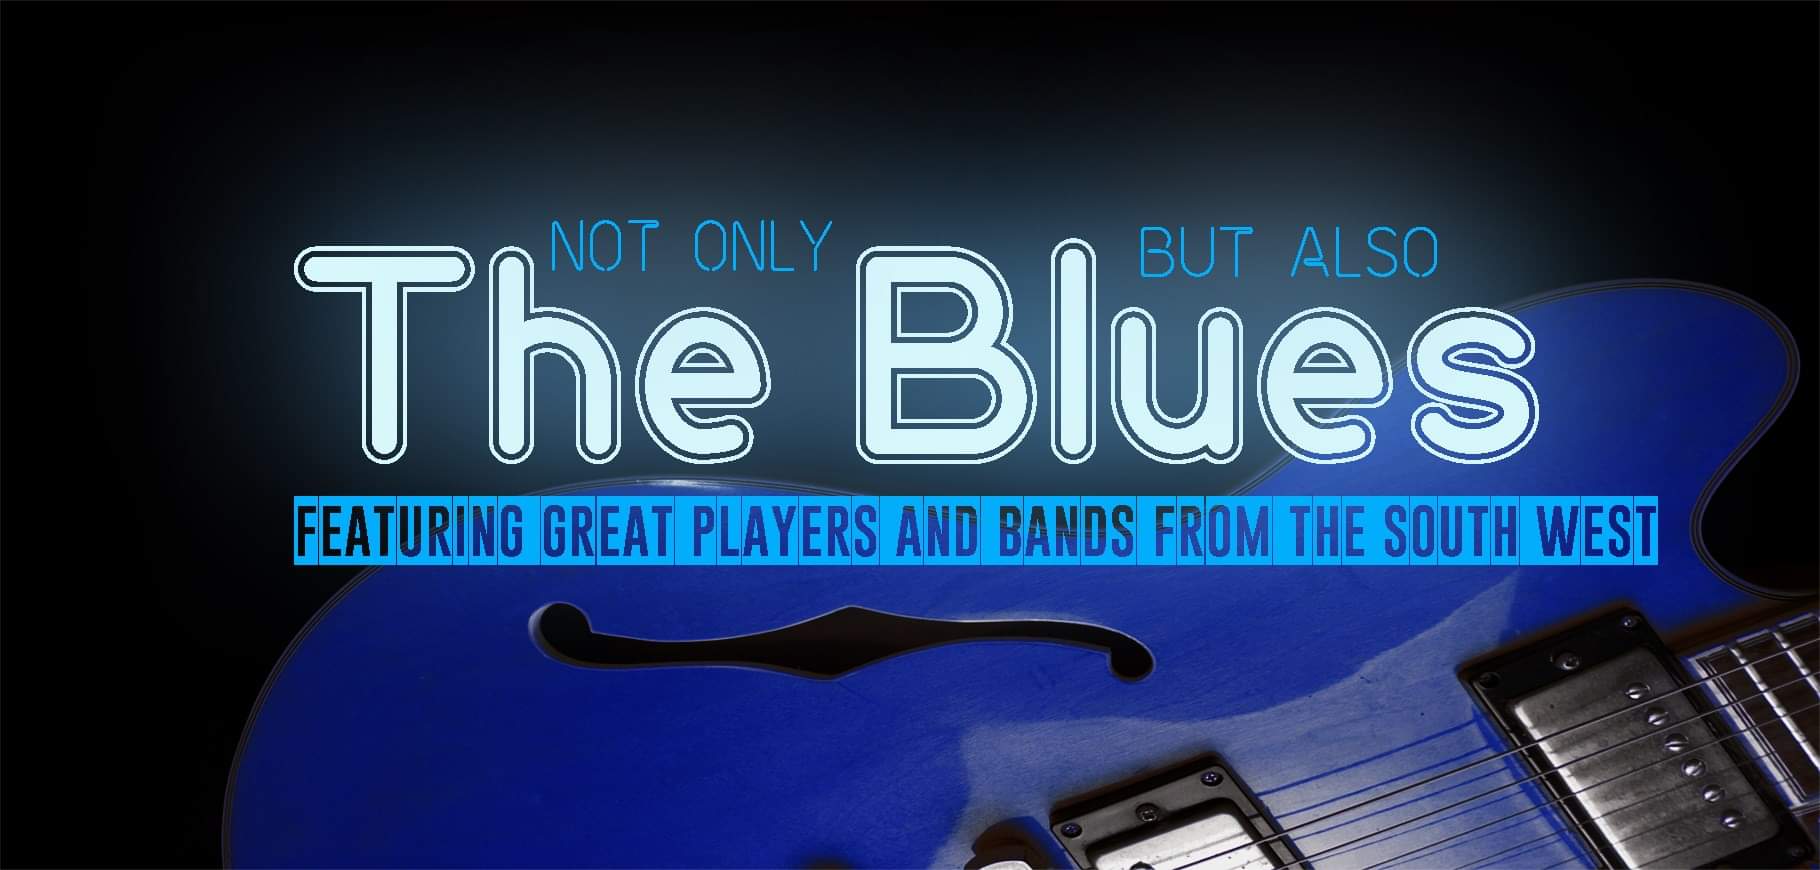 Not Only But Also The Blues: Rush Hour, Adam Sweet band, Rhythm Doctors